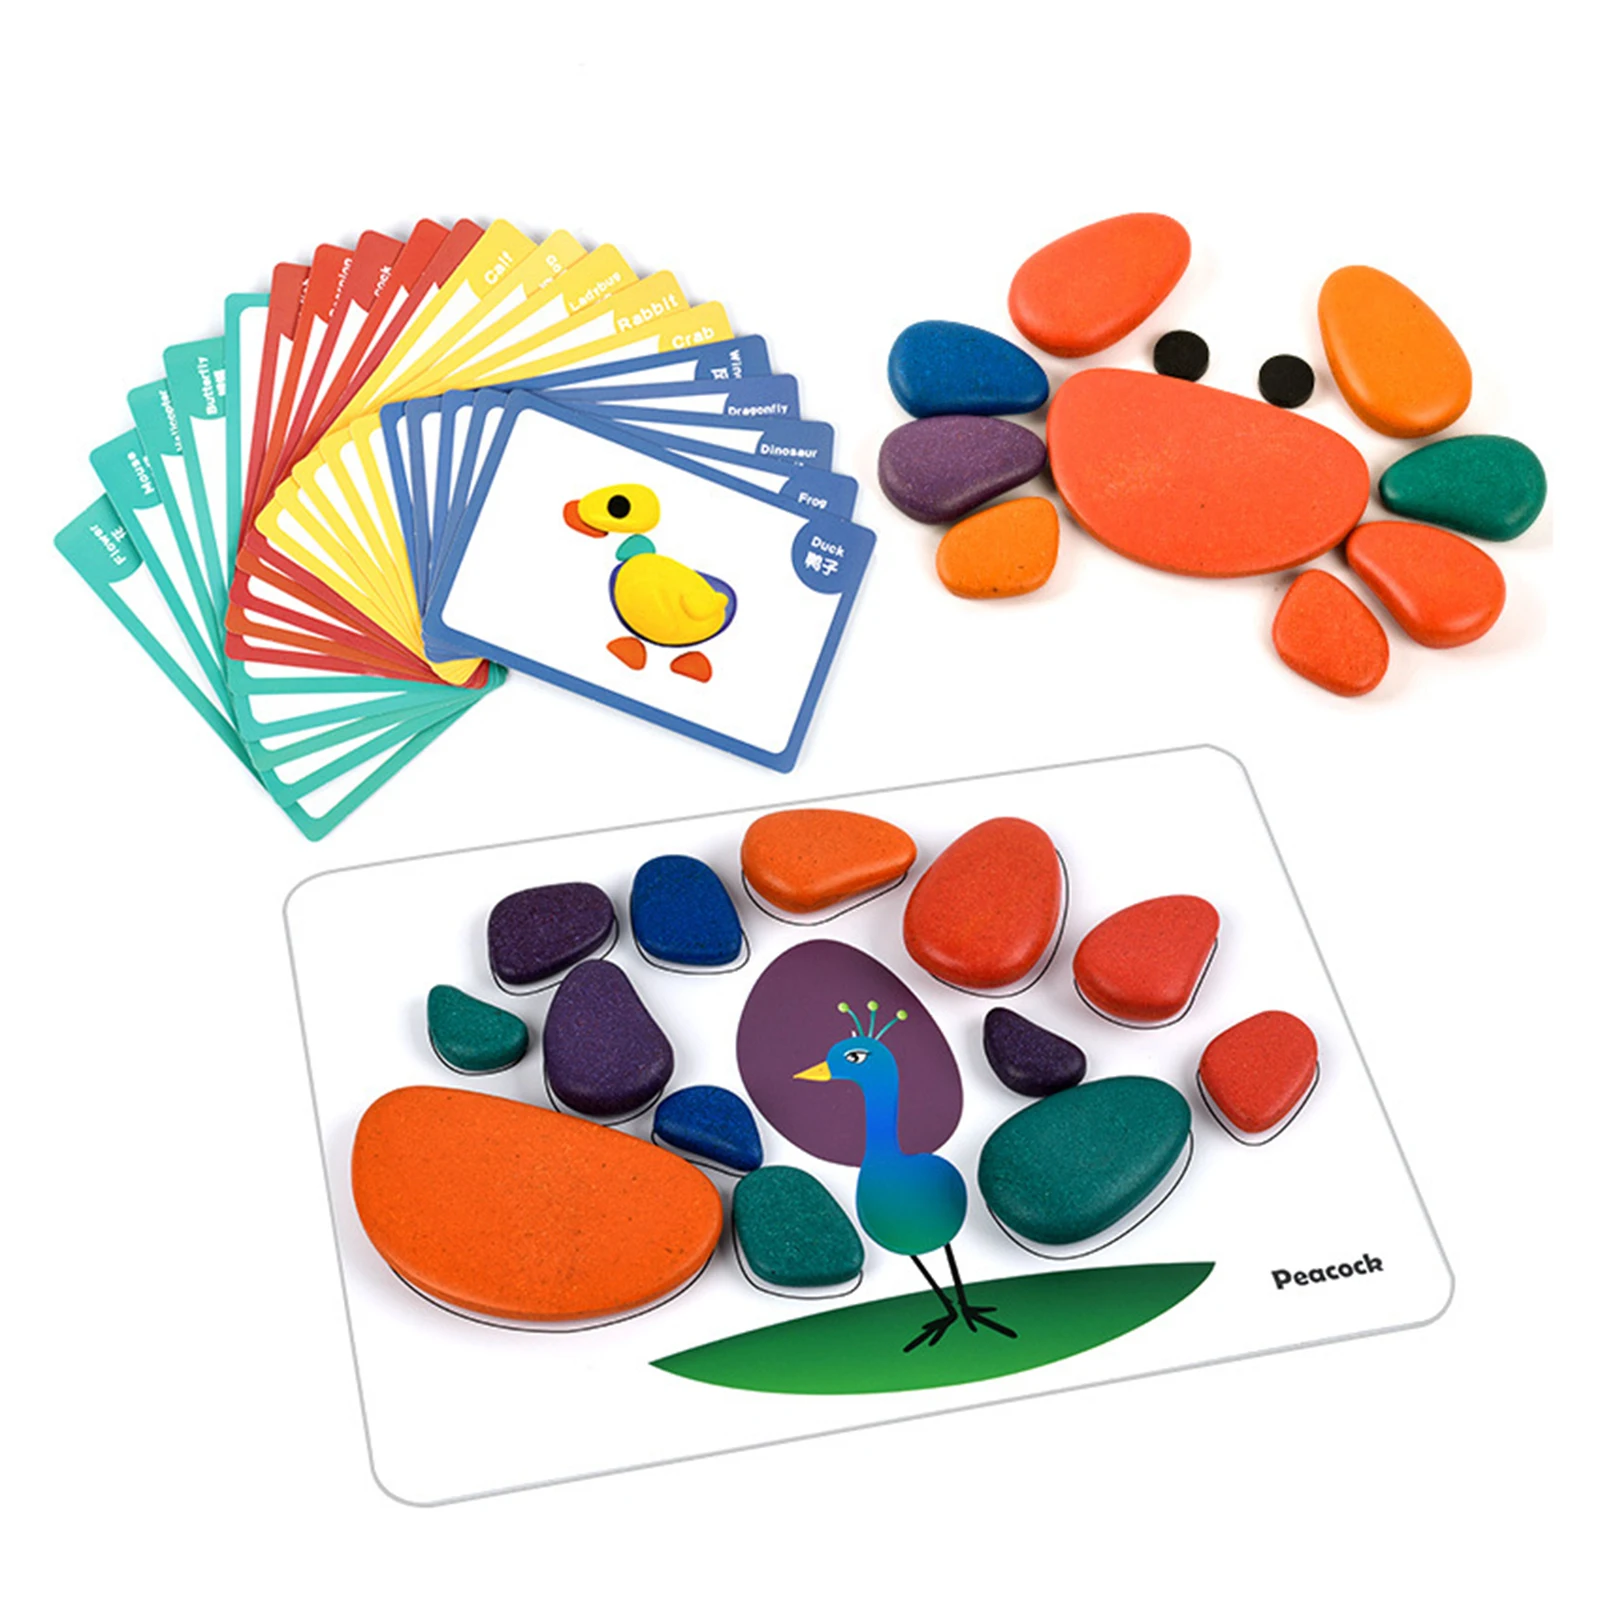 Wooden Pattern Blocks Stone with Cards Puzzle Educational Toy Game for Kids